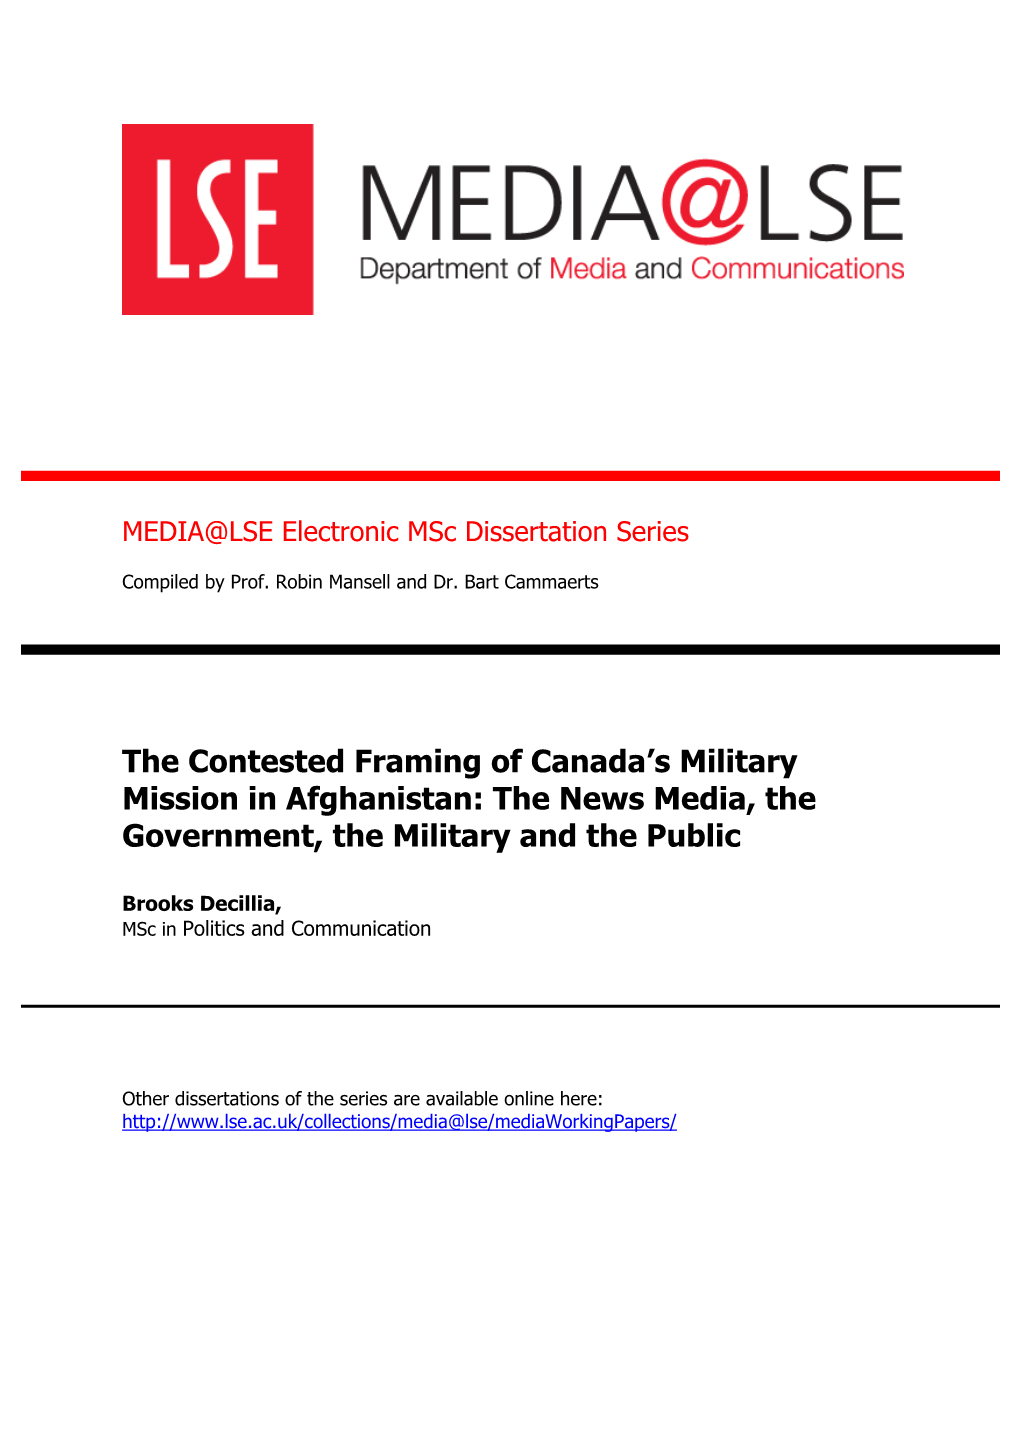 The Contested Framing of Canada's Military Mission in Afghanistan